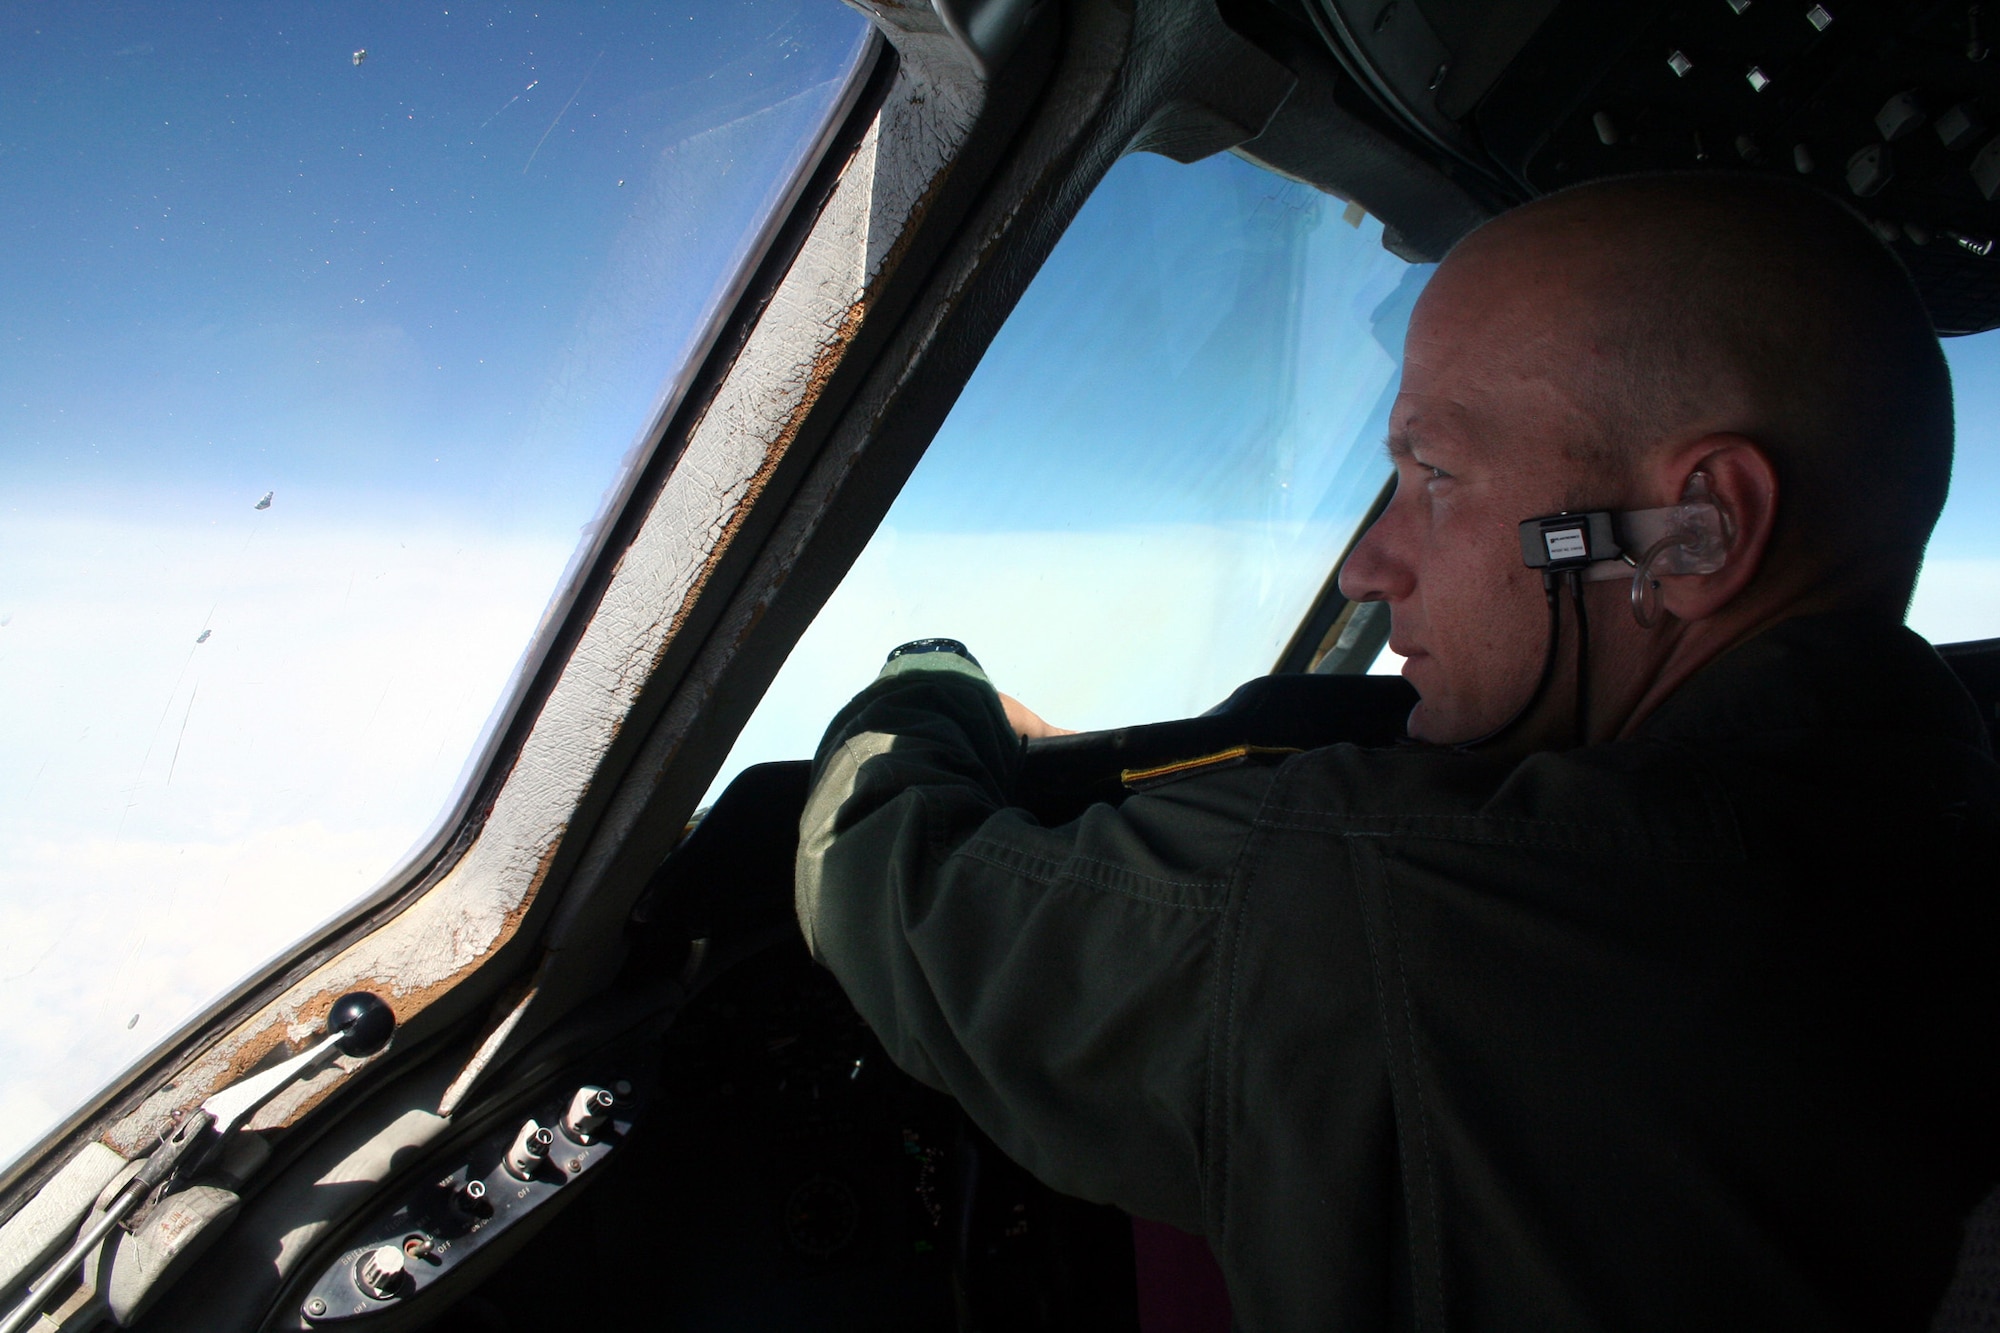 Maj. Jay Johnson, a KC-10 Extender pilot from the 571st Global Mobility Readiness Squadron at Travis Air Force Base, Calif., flies a KC-10 back to California from Scott Air Force Base, Ill., on Aug. 4, 2009.  The KC-10 is one of Air Force's and Air Mobility Command's air refueling aircraft that helps provide global reach and the Air Force to fly, fight and win...in air, space and cyberspace.  (U.S. Air Force Photo/Tech. Sgt. Scott T. Sturkol)